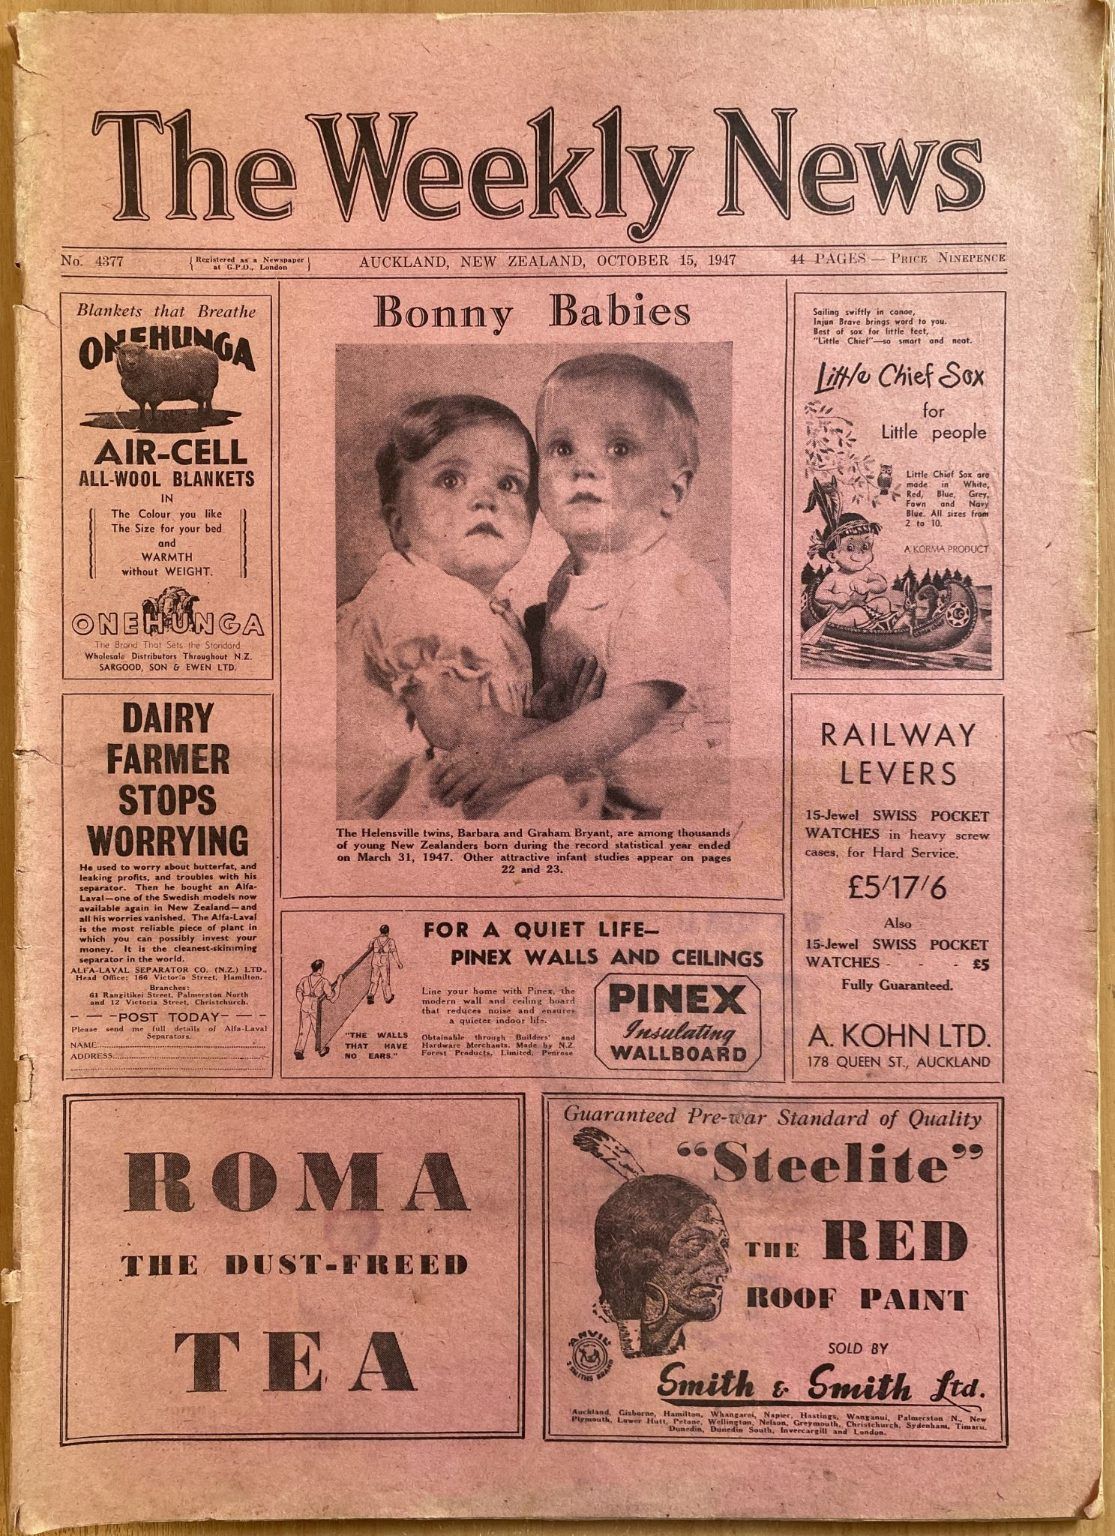 OLD NEWSPAPER: The Weekly News, No. 4377, 15 October 1947